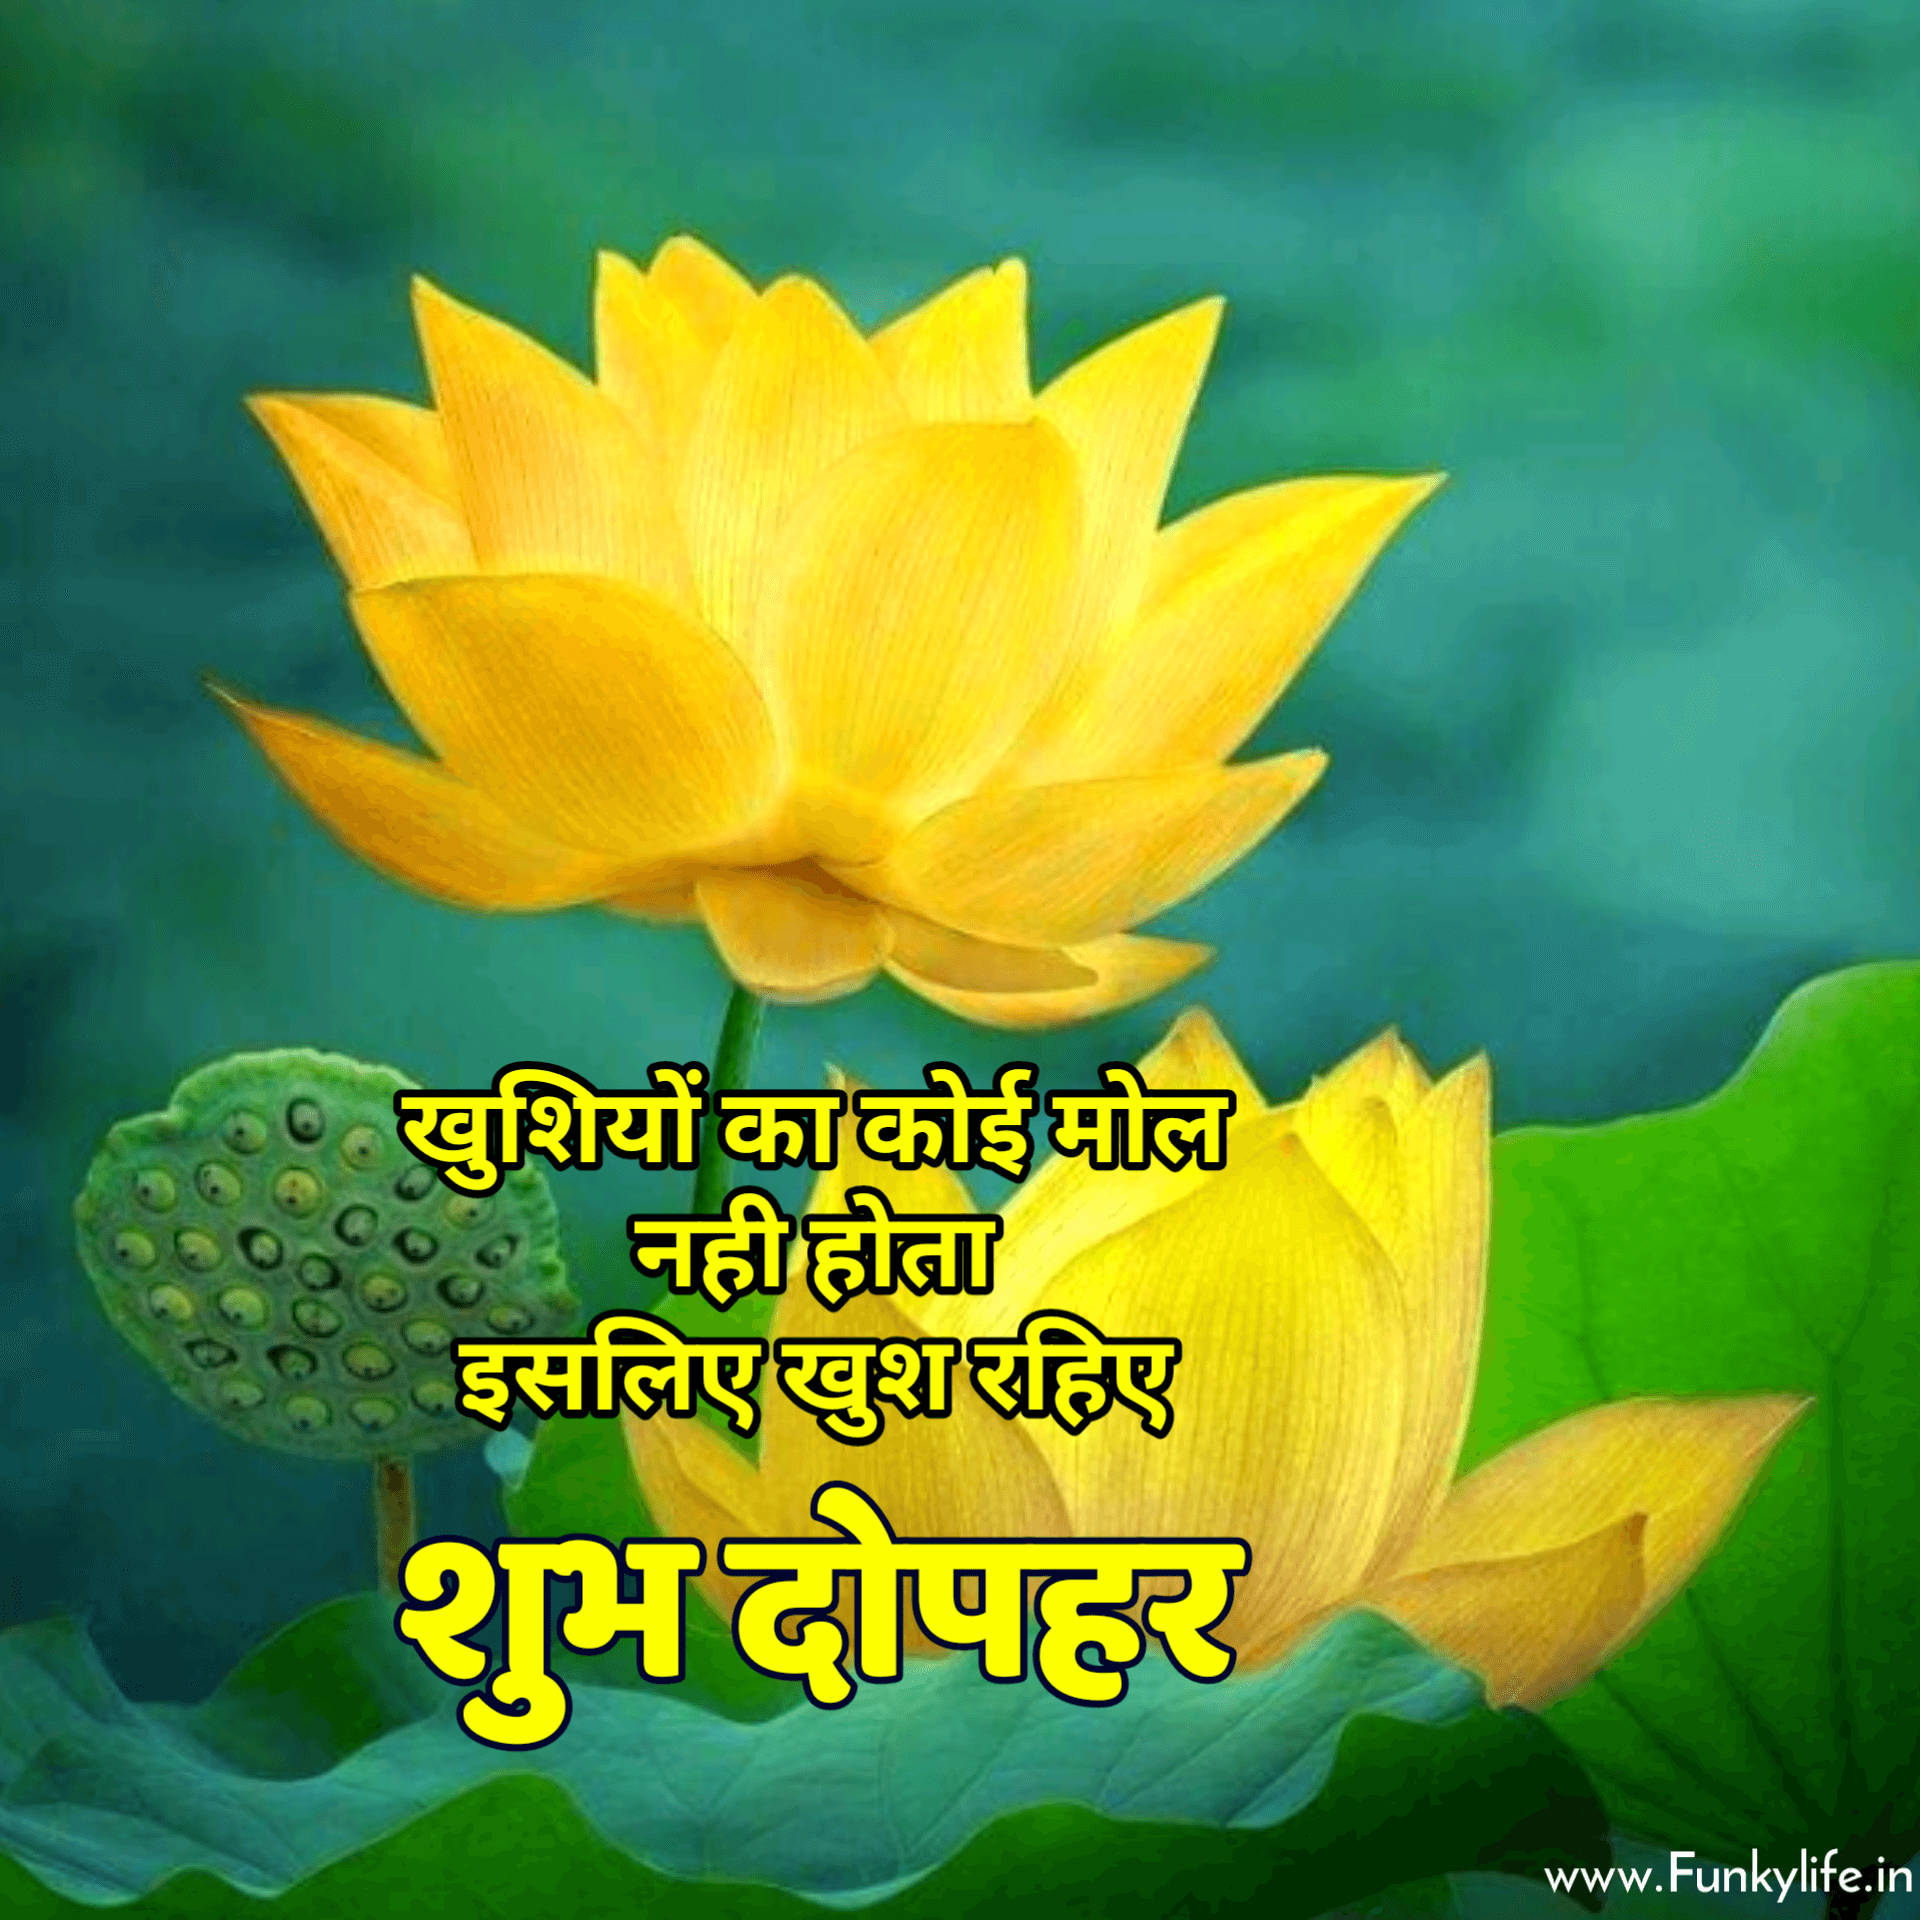 Good Afternoon Image with Quotes in Hindi